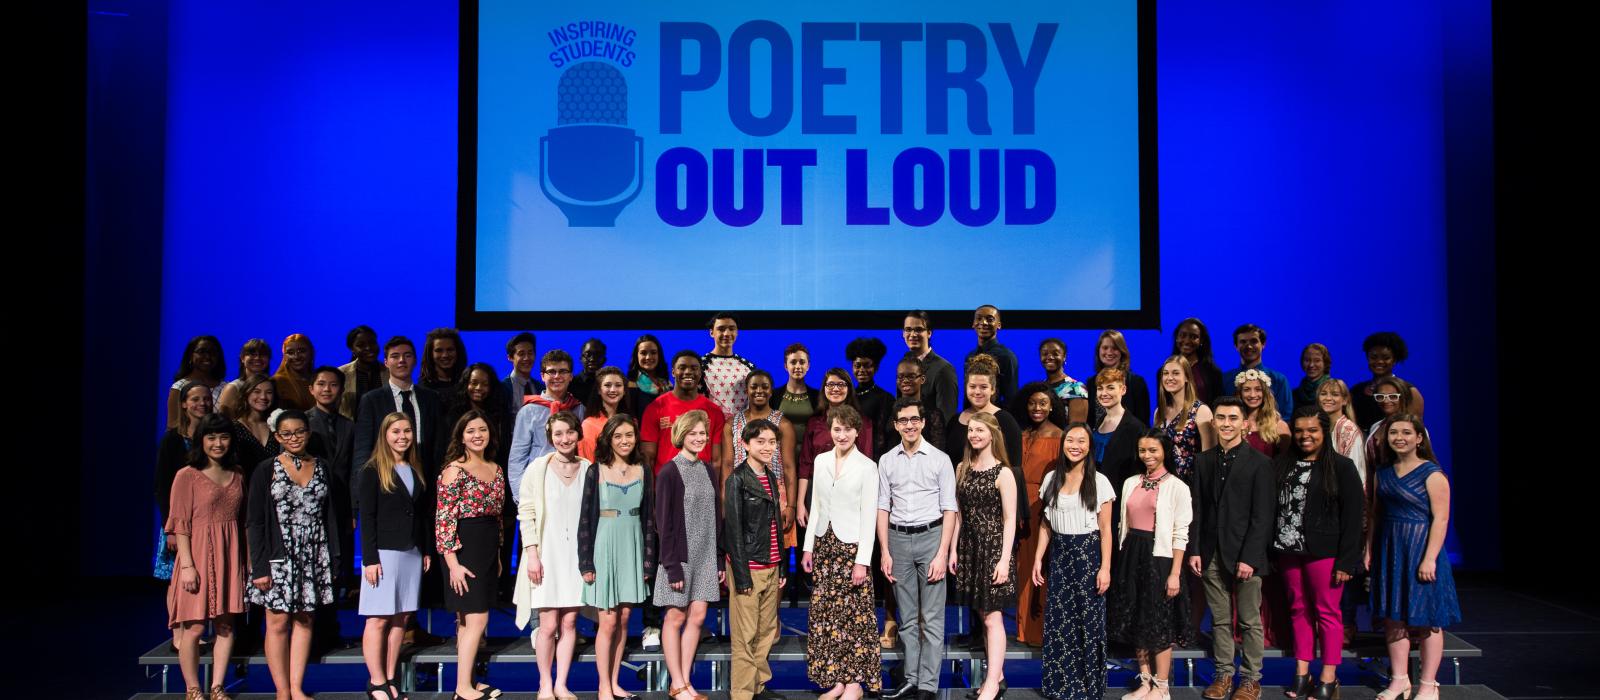 Teenagers from every state on state for a poetry recitation contest. 